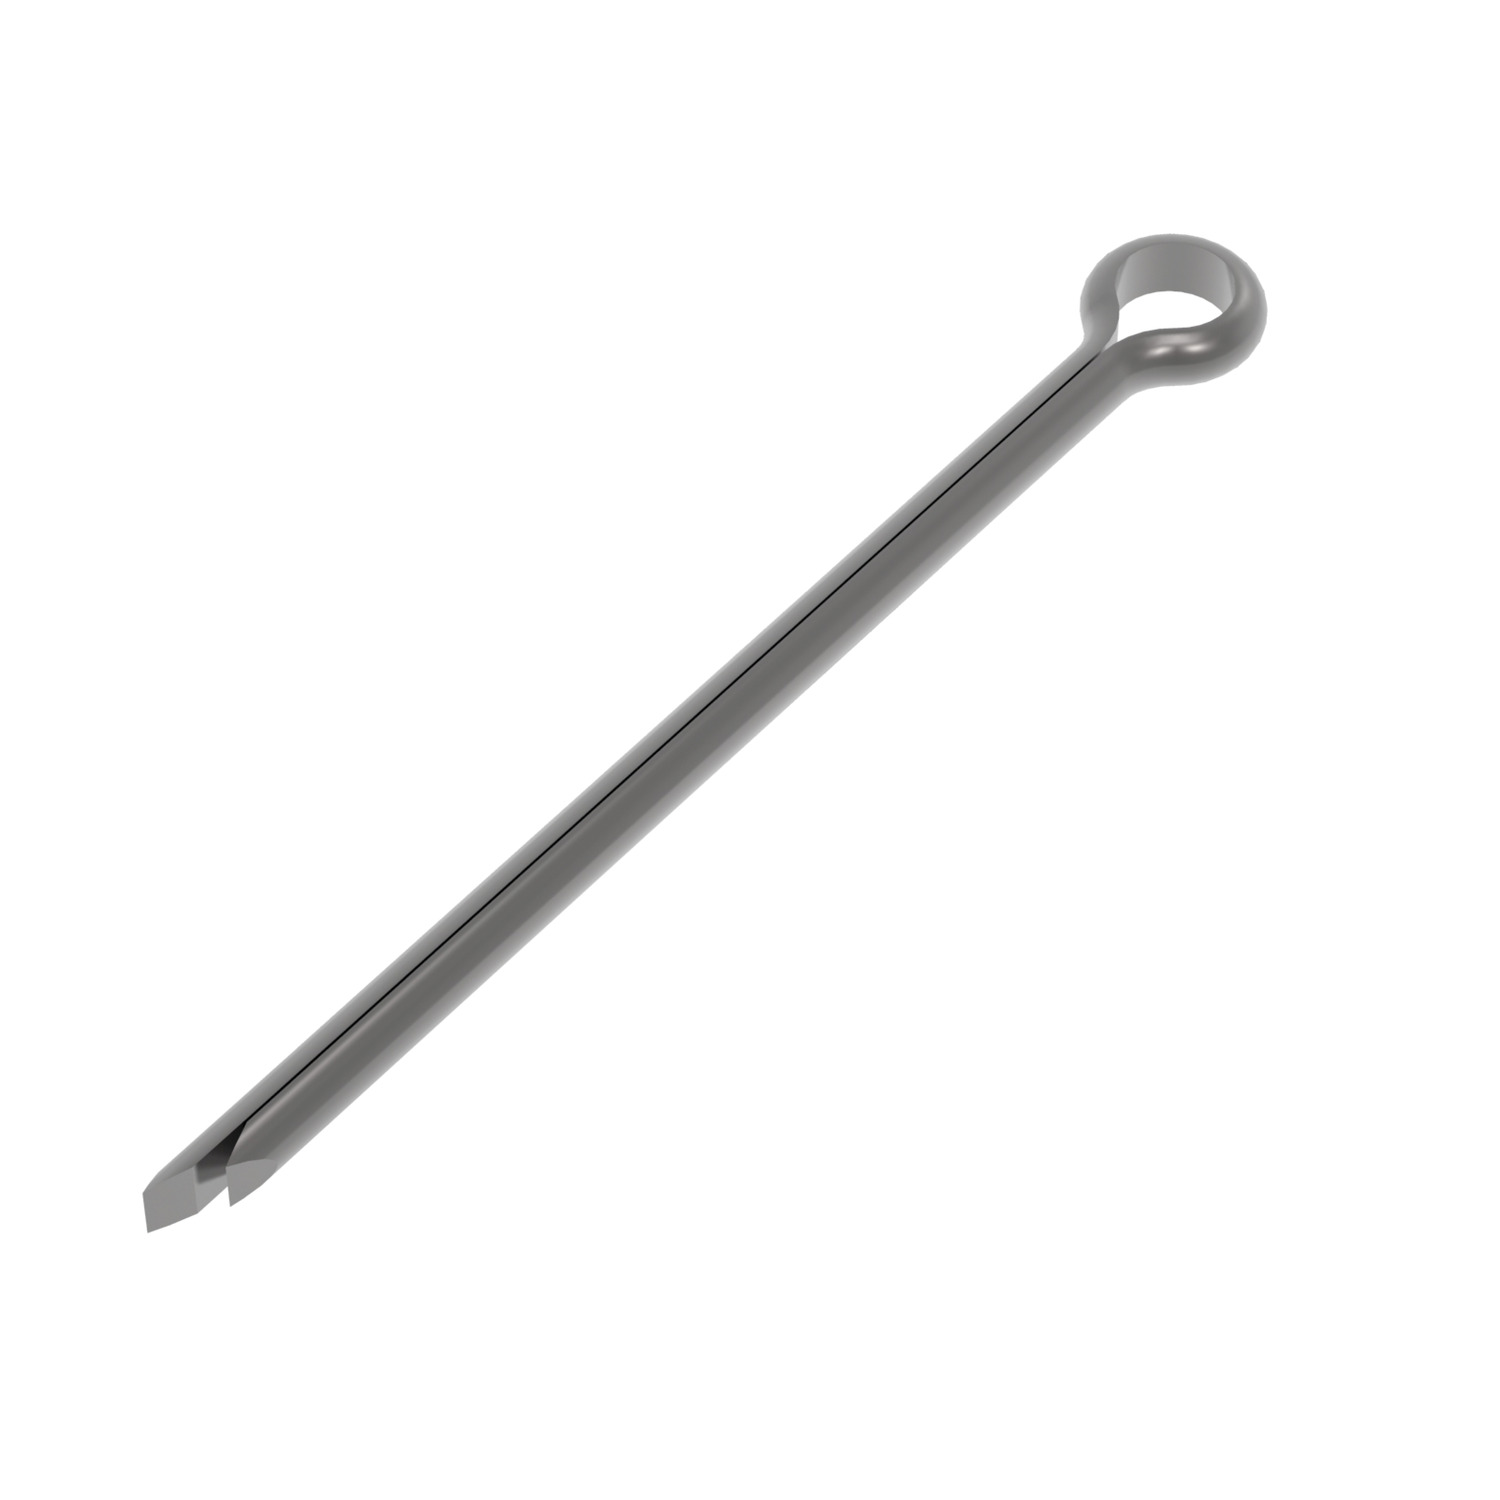 P1240 - Steel Cotter Pins